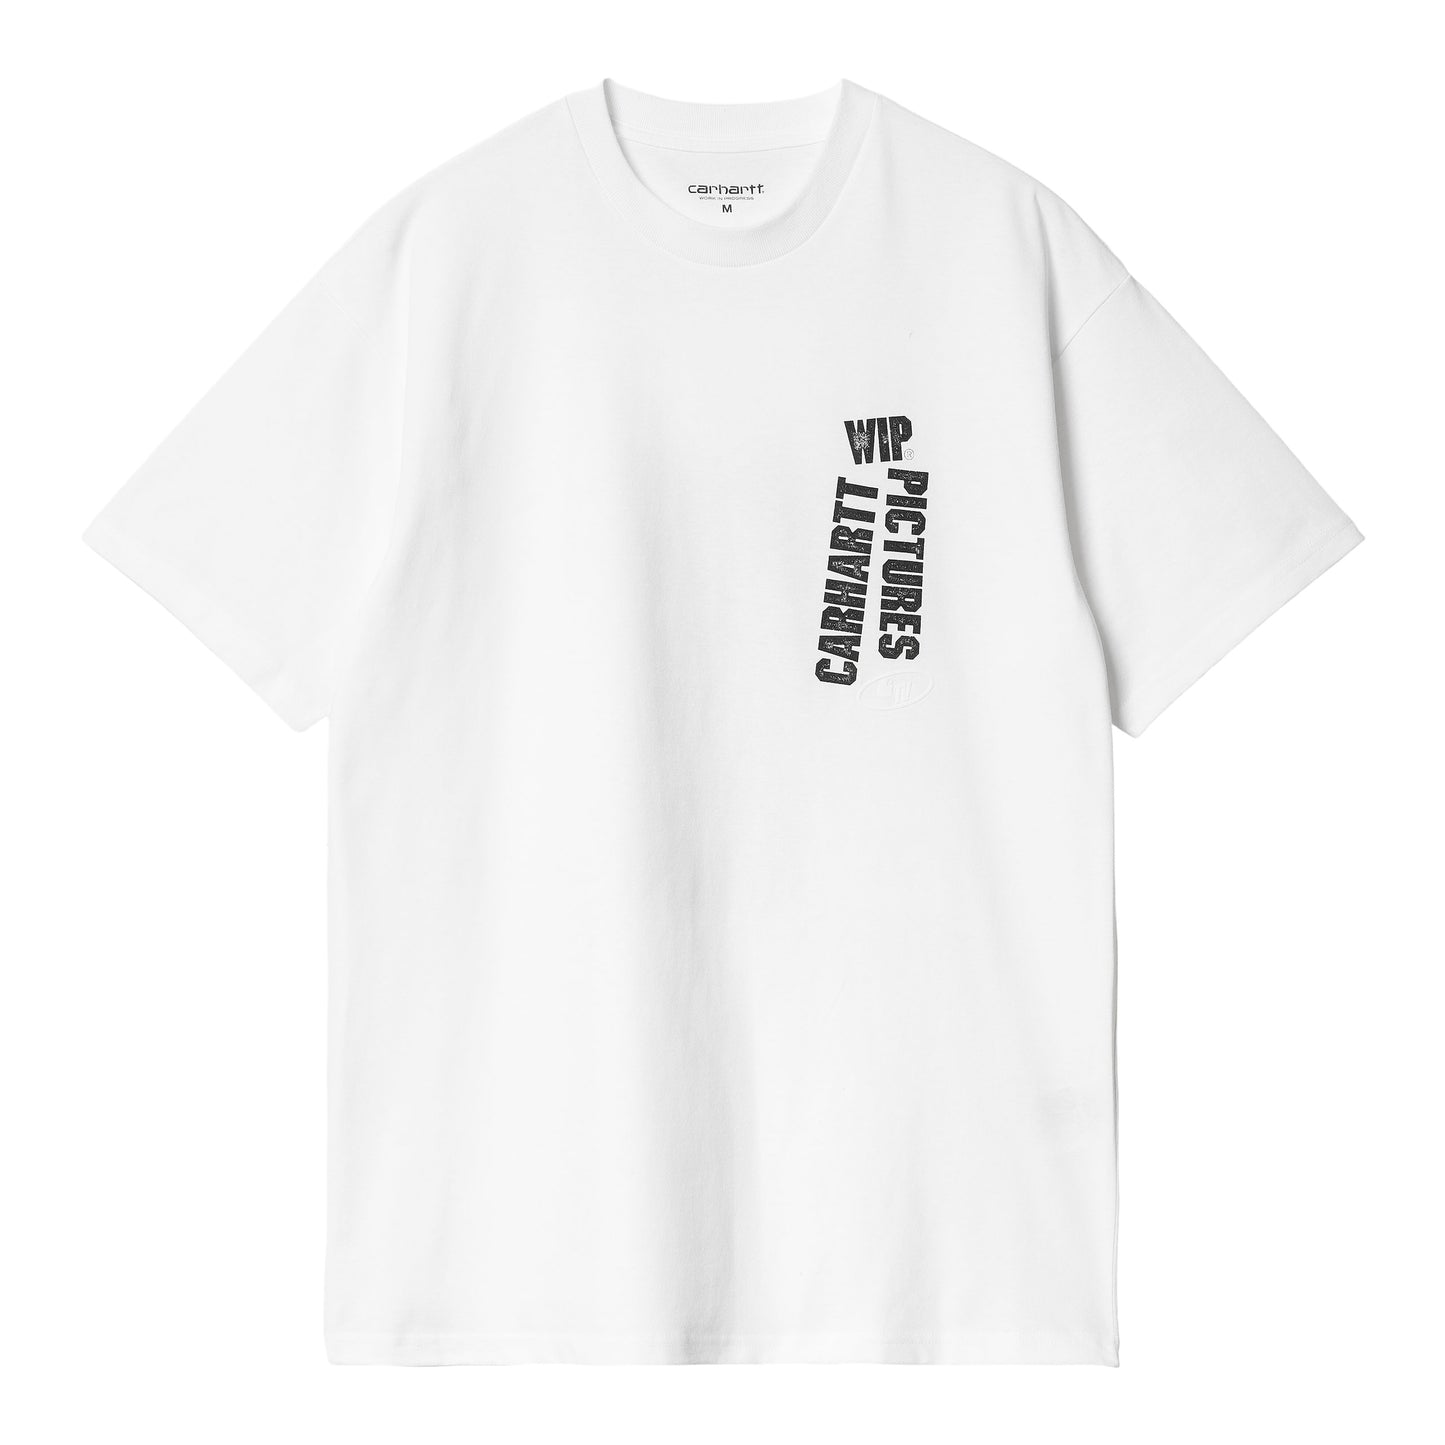 Carhartt WIP S/S wip-pictures-t-shirt-white